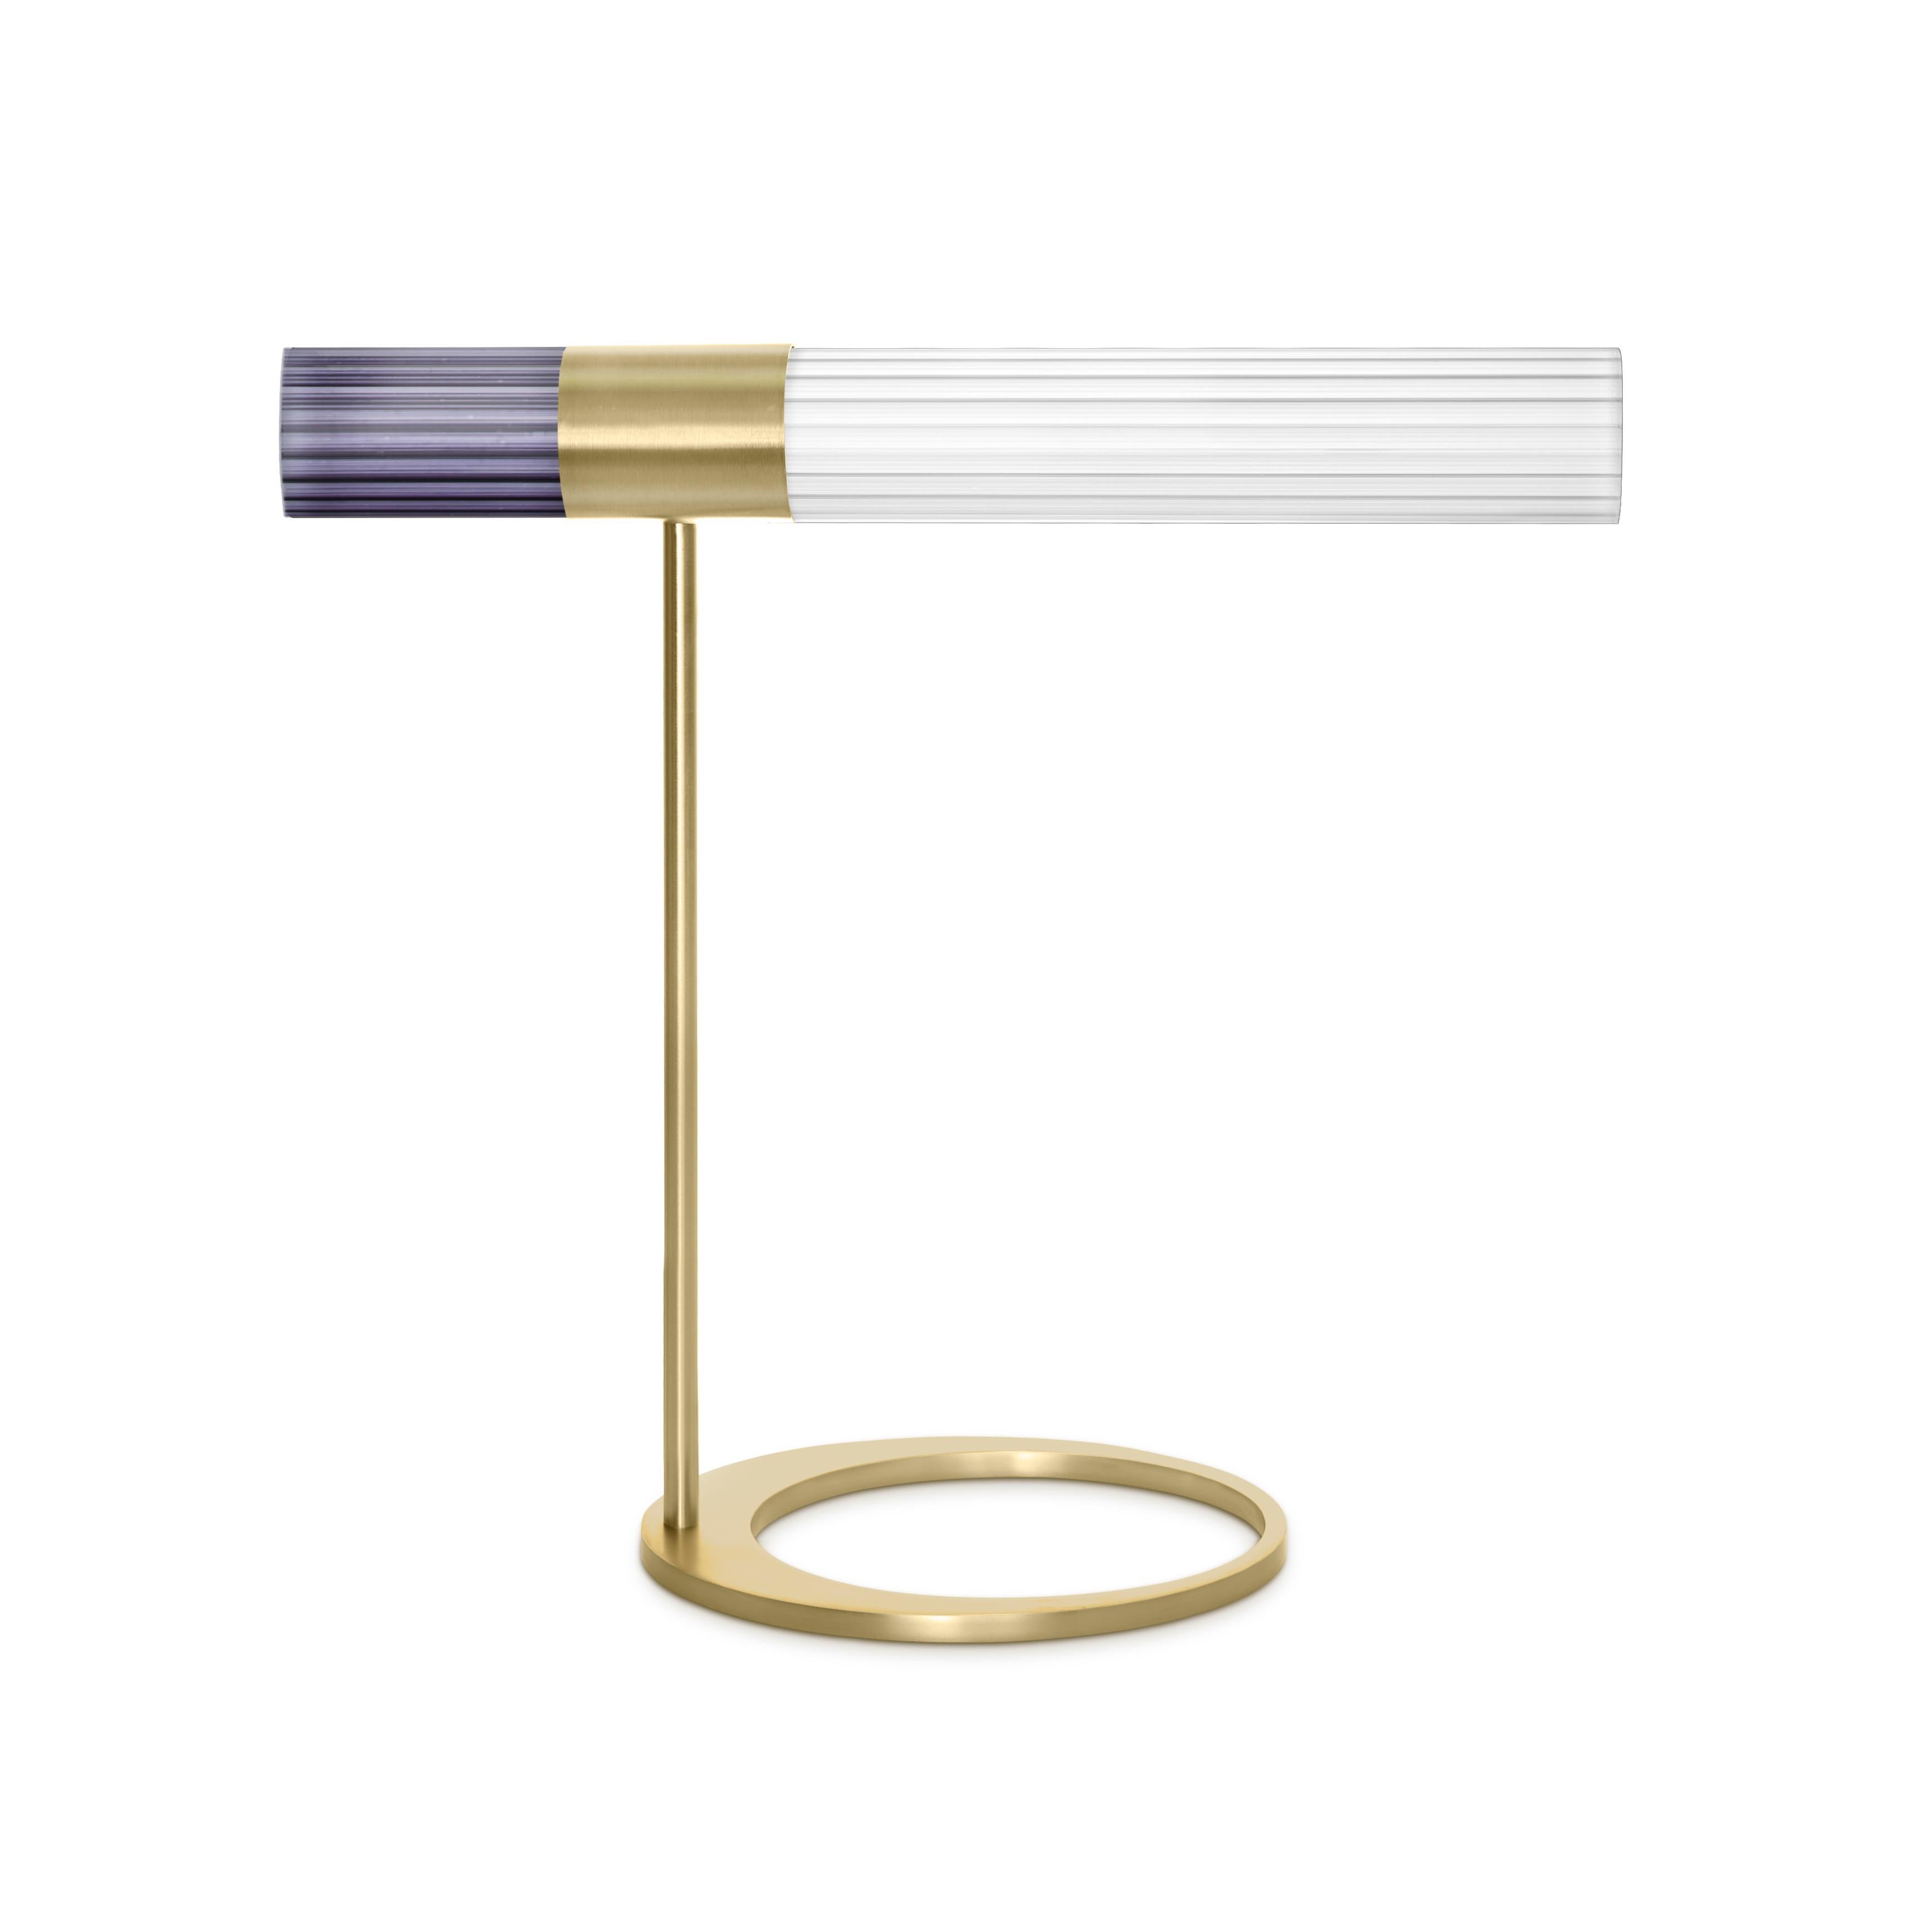 Sbarlusc table lamp by Luce Tu.
Dimensions: 49 x 46 cm
Materials: Brass and glass

Sbarlusc in Milanese dialect represents the sparkle of a precious and very bright object. The colored glasses, which combine with each other creating games of